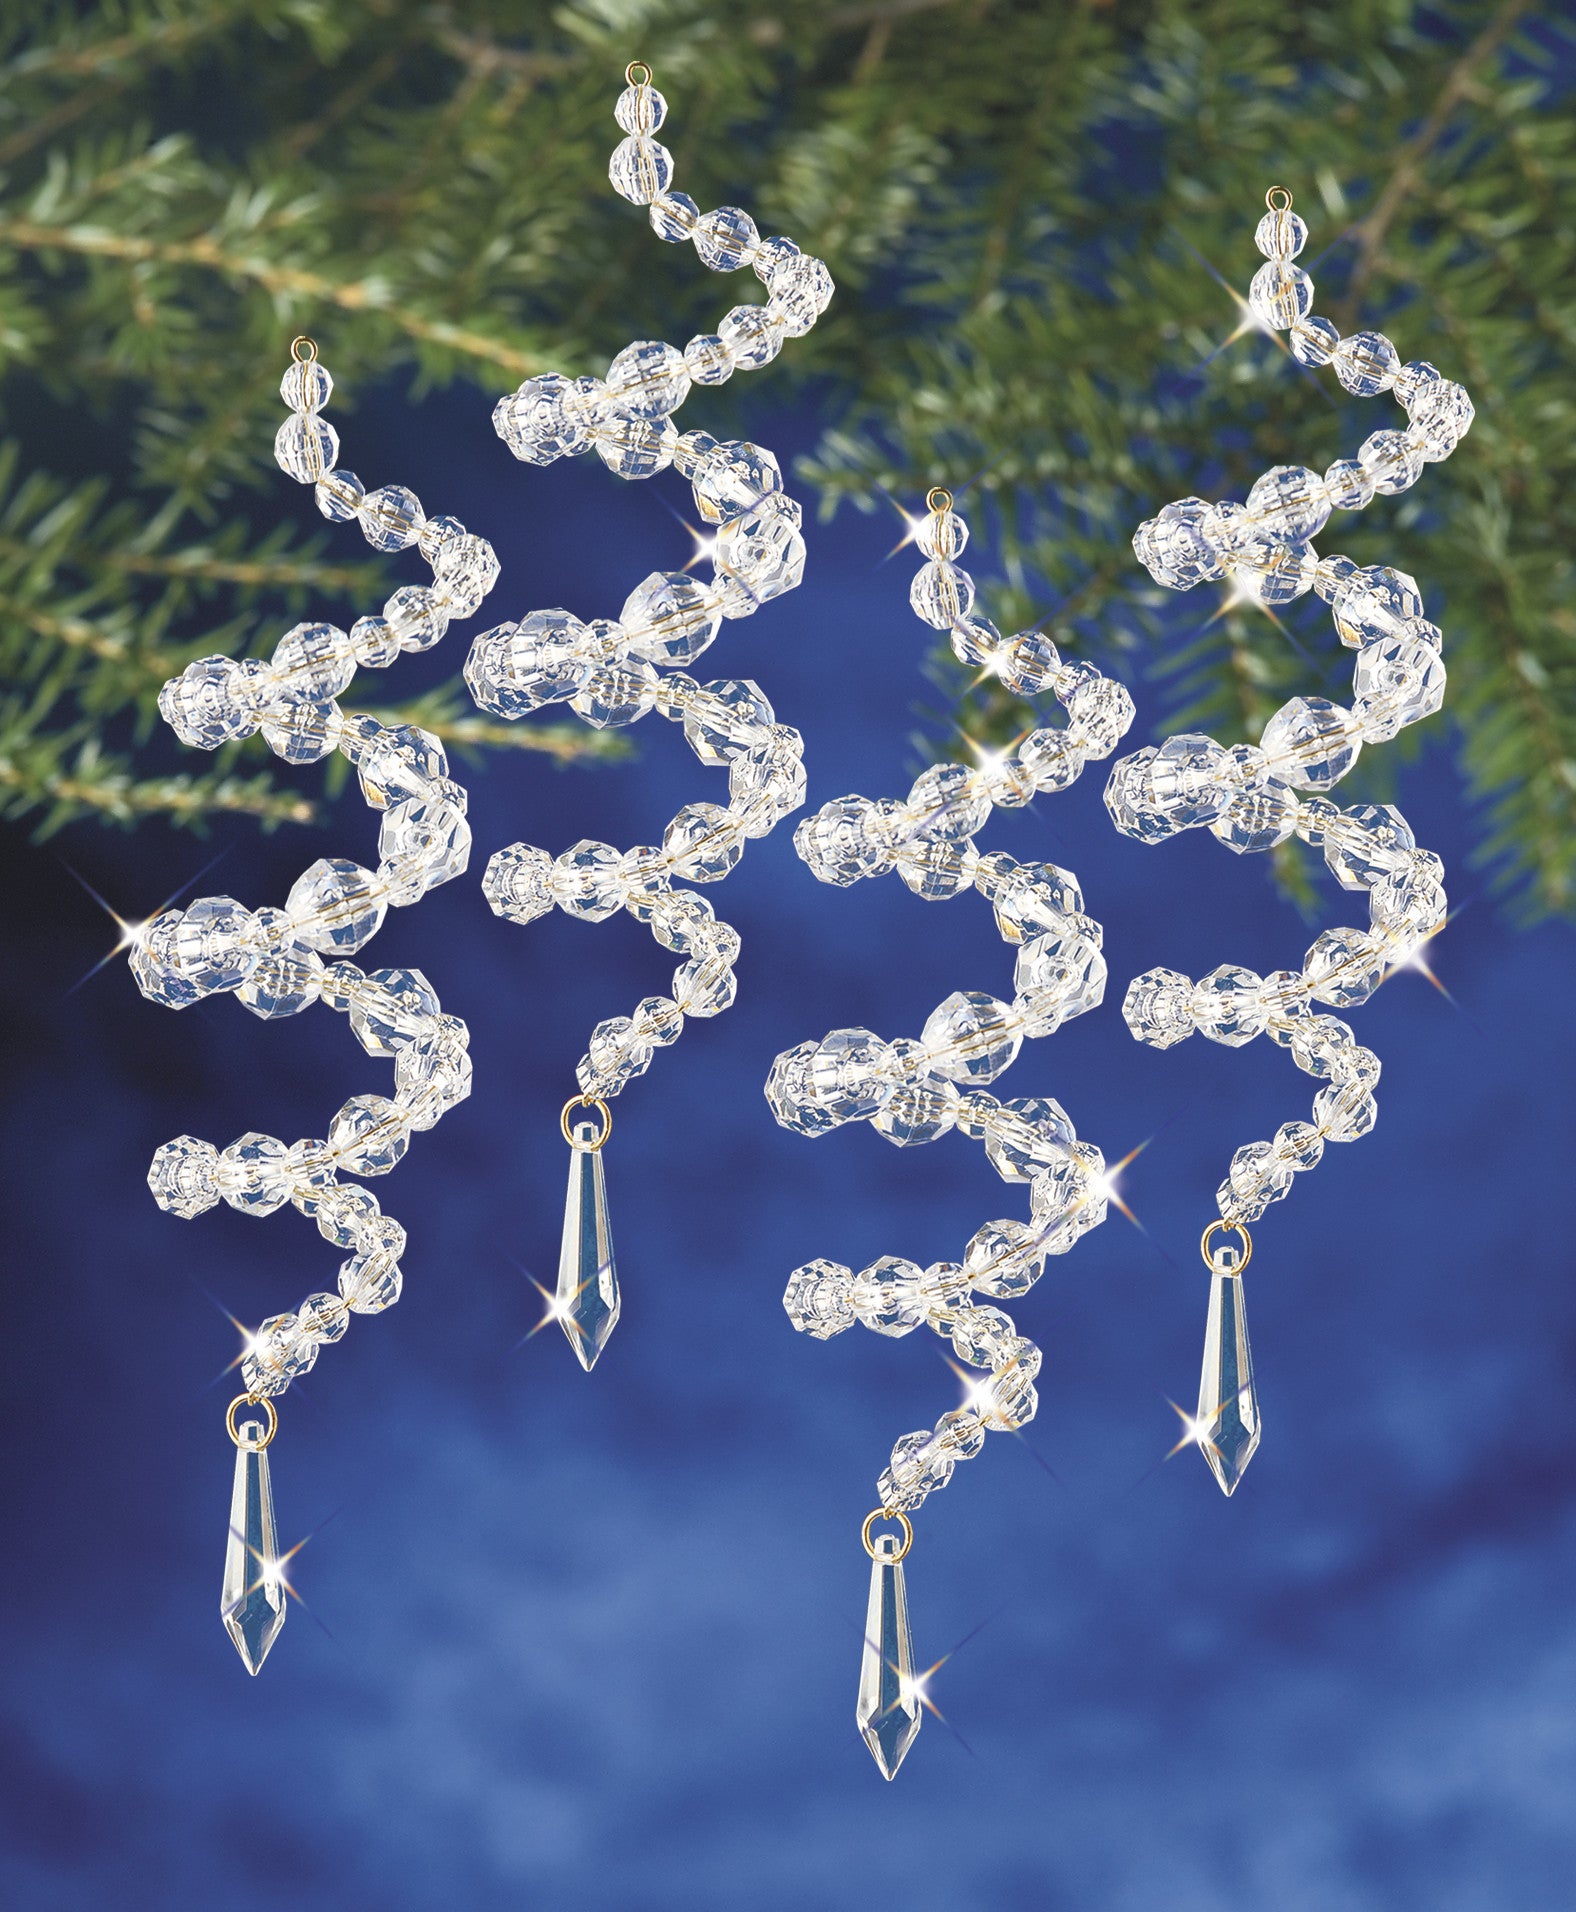 Ornament kit, The Beadery®, plastic, clear, mini snowflakes (5500). Sold  individually. - Fire Mountain Gems and Beads